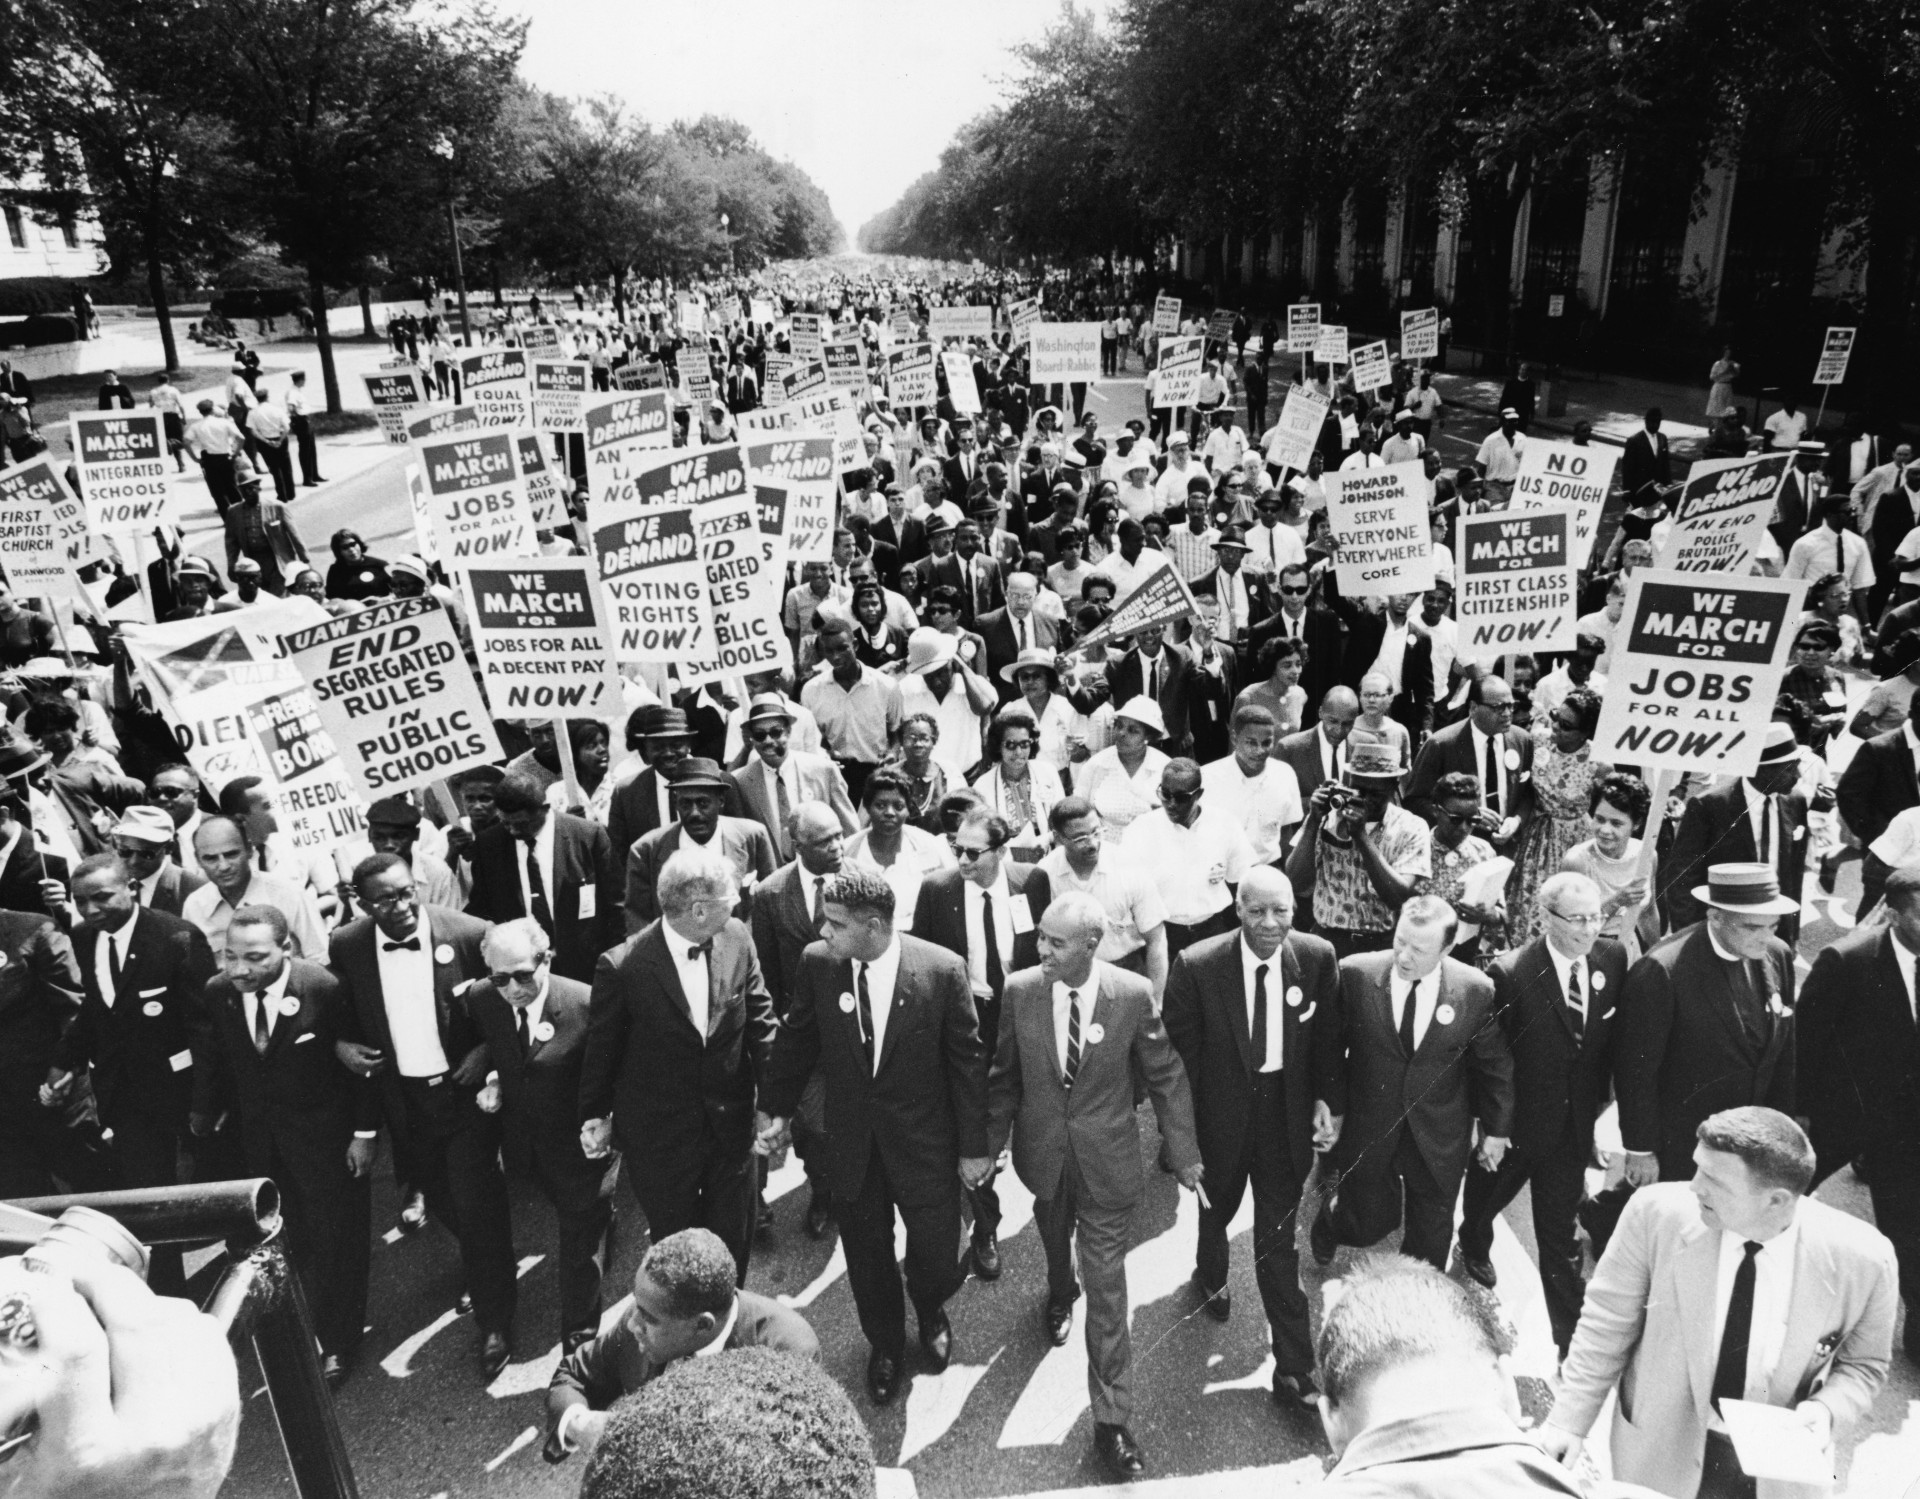 The March on Washington was held in Washington, D.C. on August 28, 1963.<p><a href="https://www.msn.com/en-us/community/channel/vid-7xx8mnucu55yw63we9va2gwr7uihbxwc68fxqp25x6tg4ftibpra?cvid=94631541bc0f4f89bfd59158d696ad7e">Follow us and access great exclusive content every day</a></p>